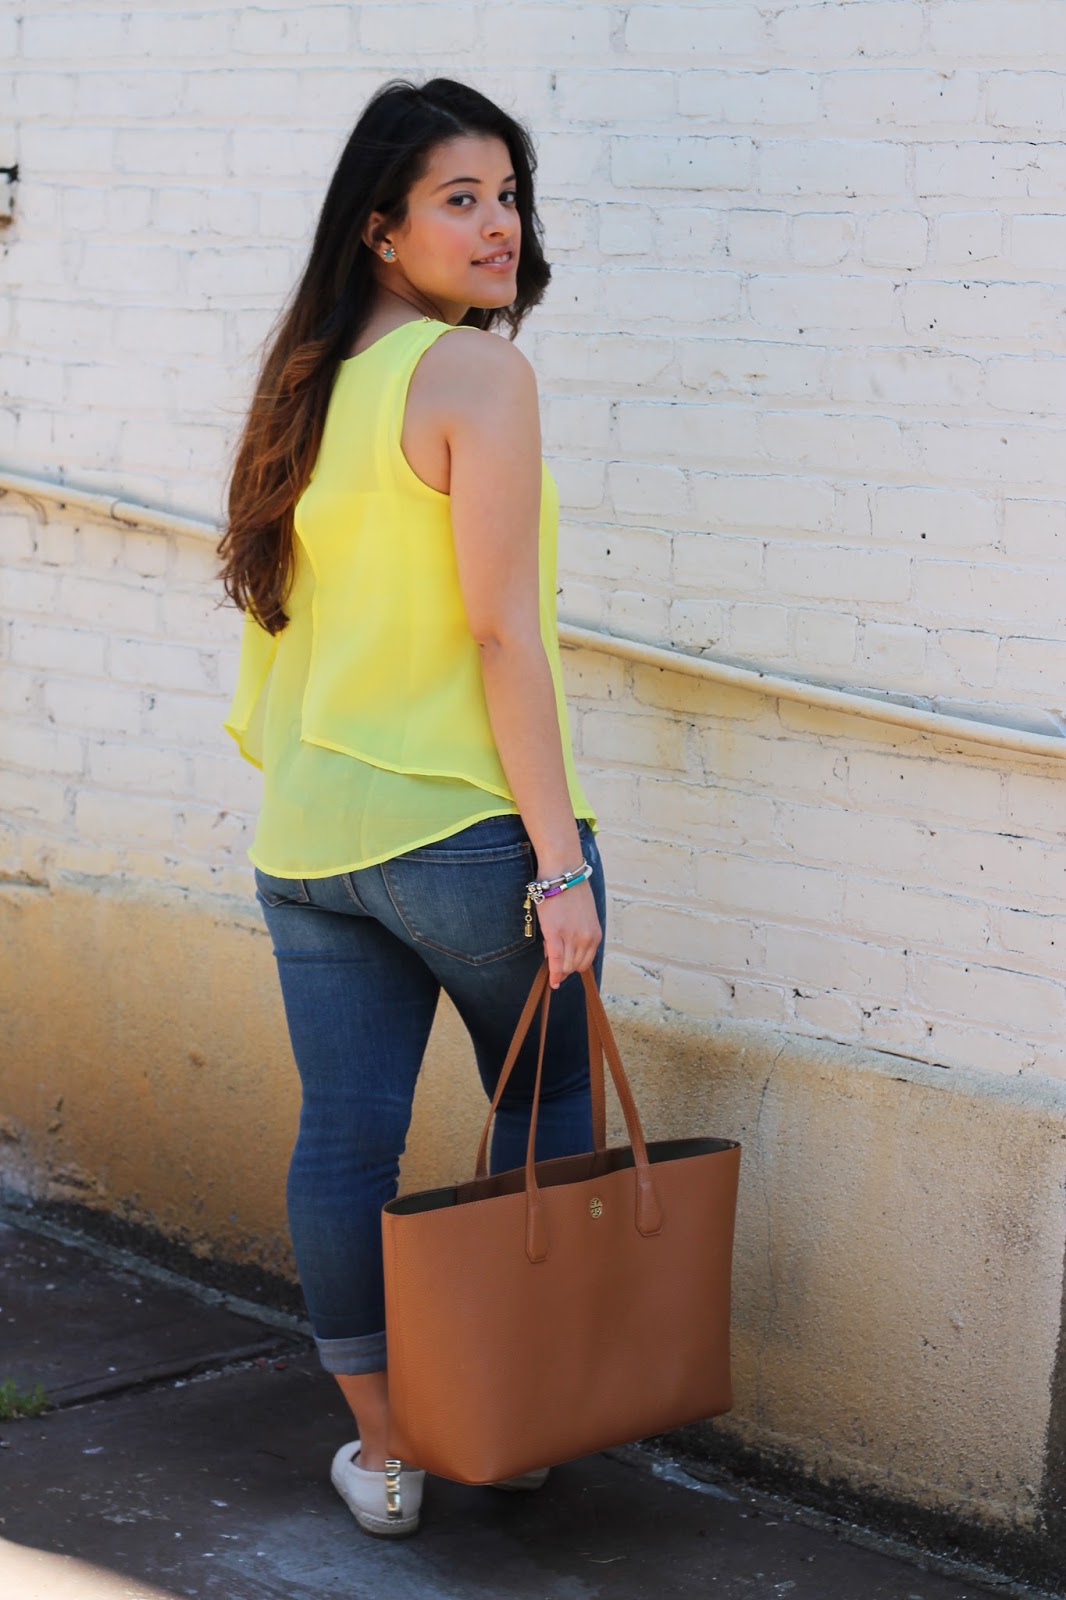 tory burch, oldnavy, marshalls, daniel wellington, fabfound, zara, espadrilles, summer, spring, distressed jeans, nordstrom, yellow, perry leather tote, nordstrom , blogger, , fashion blogger, spring fashion, personalstyle, 